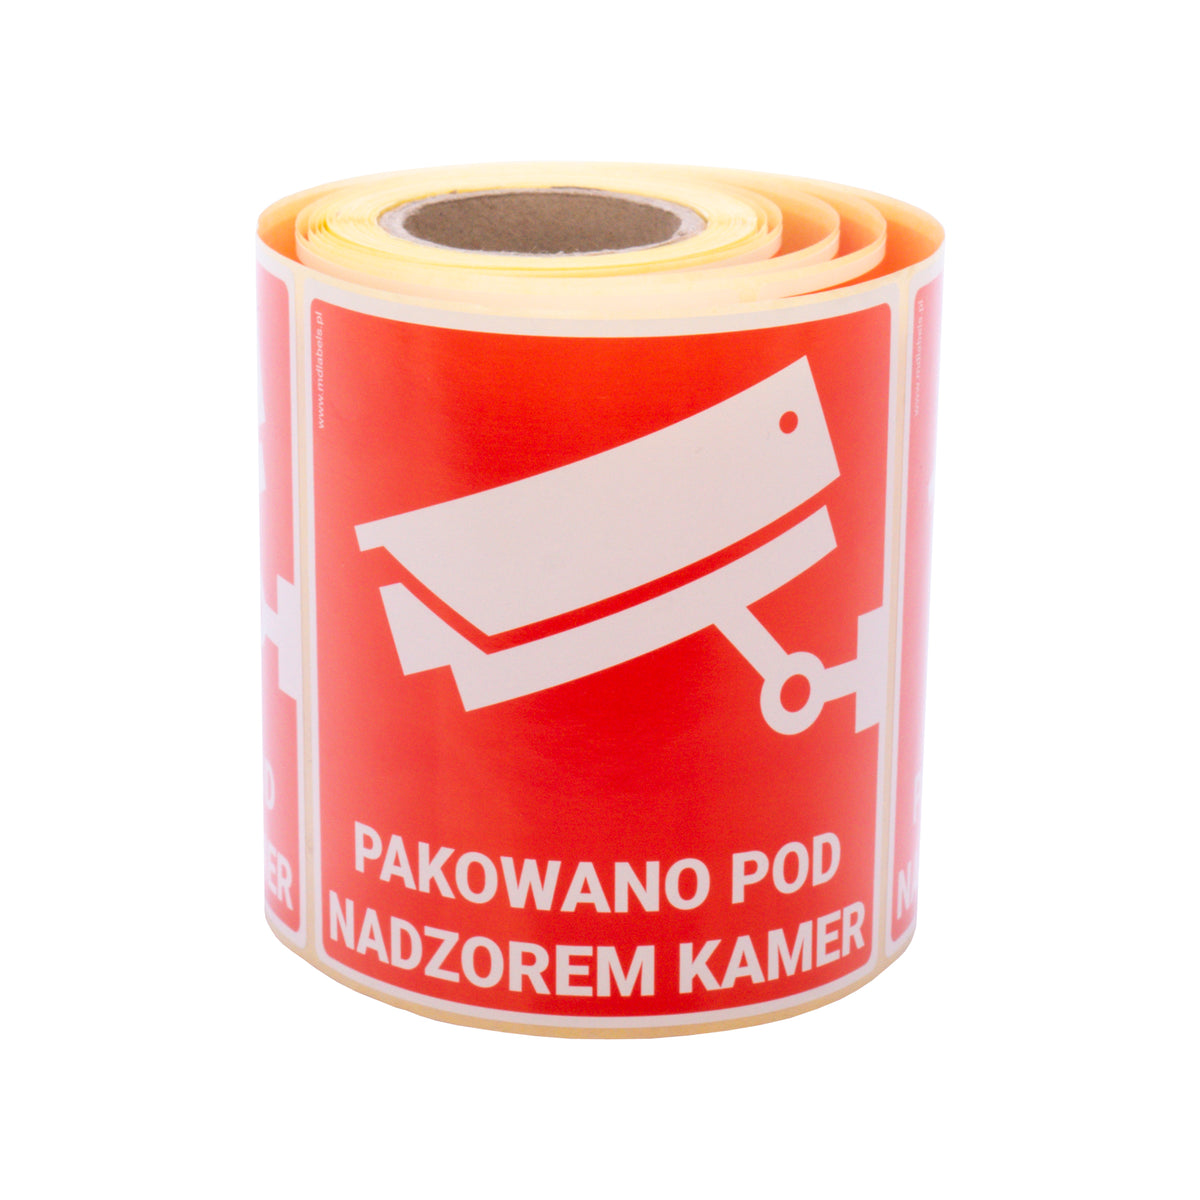 Self-adhesive warning labels - Packaged under camera surveillance! - 98x98mm 100 per roll